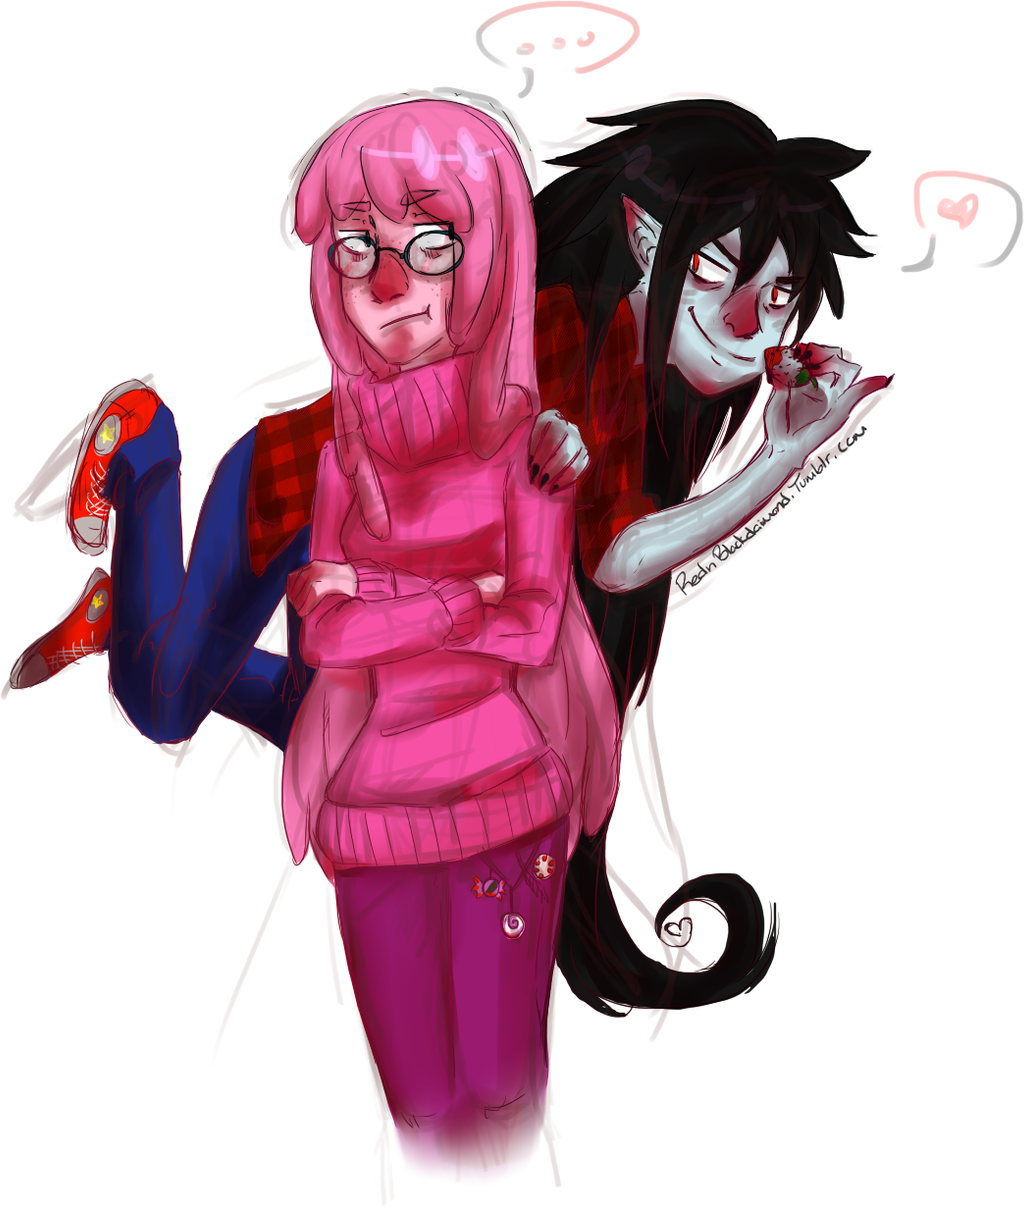 PB and Marcy by JKaqua on DeviantArt